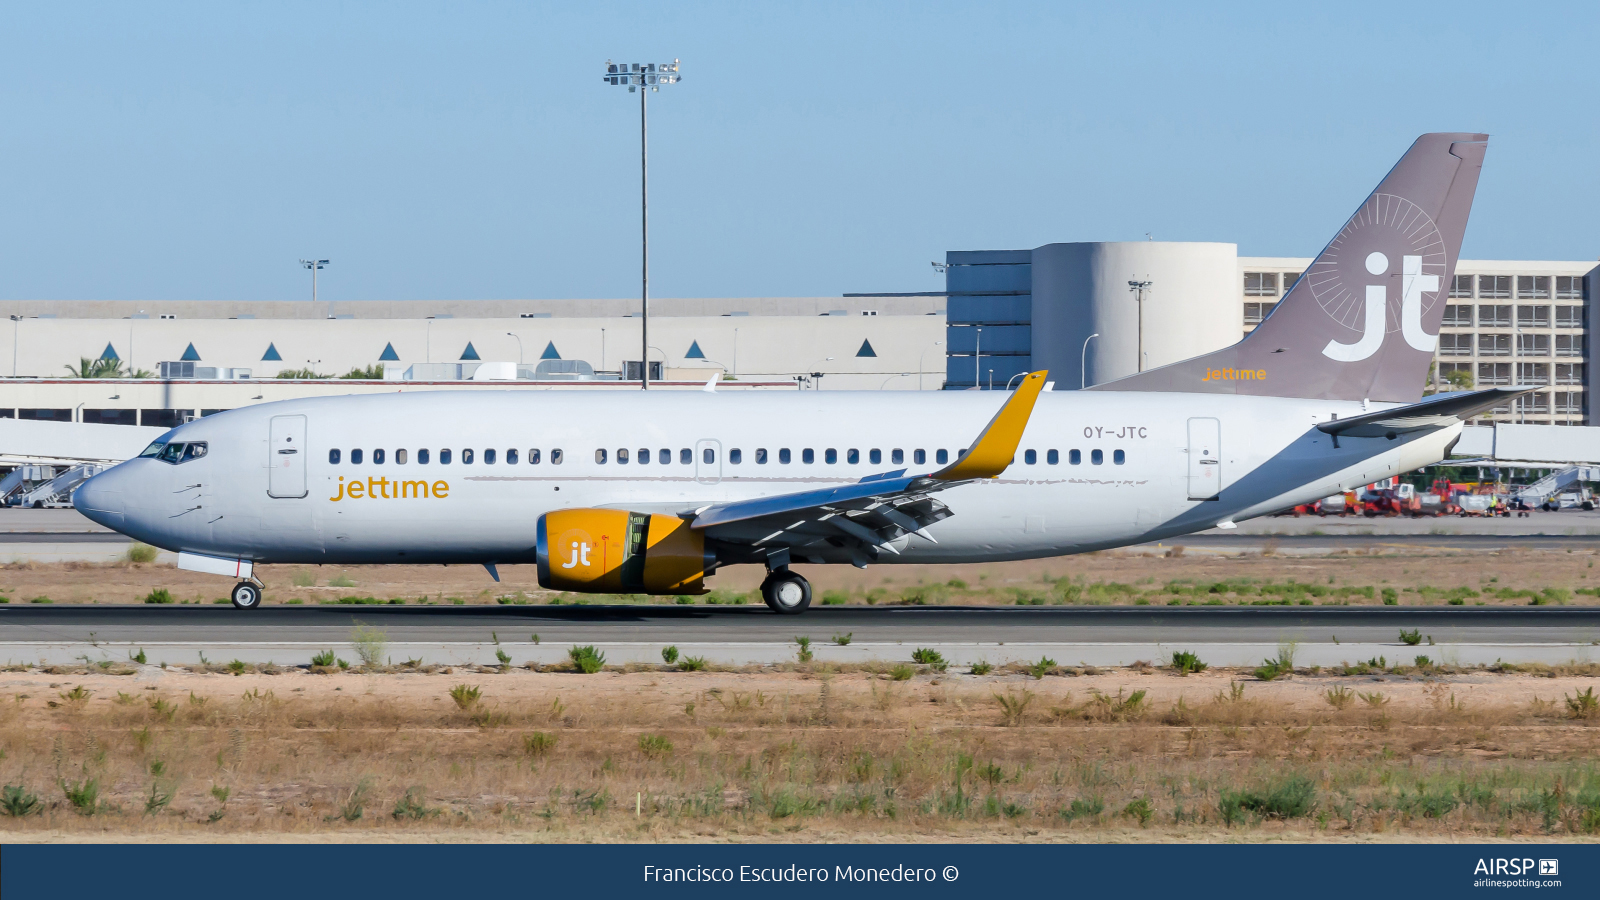 Jet Time  Boeing 737-300  OY-JTC